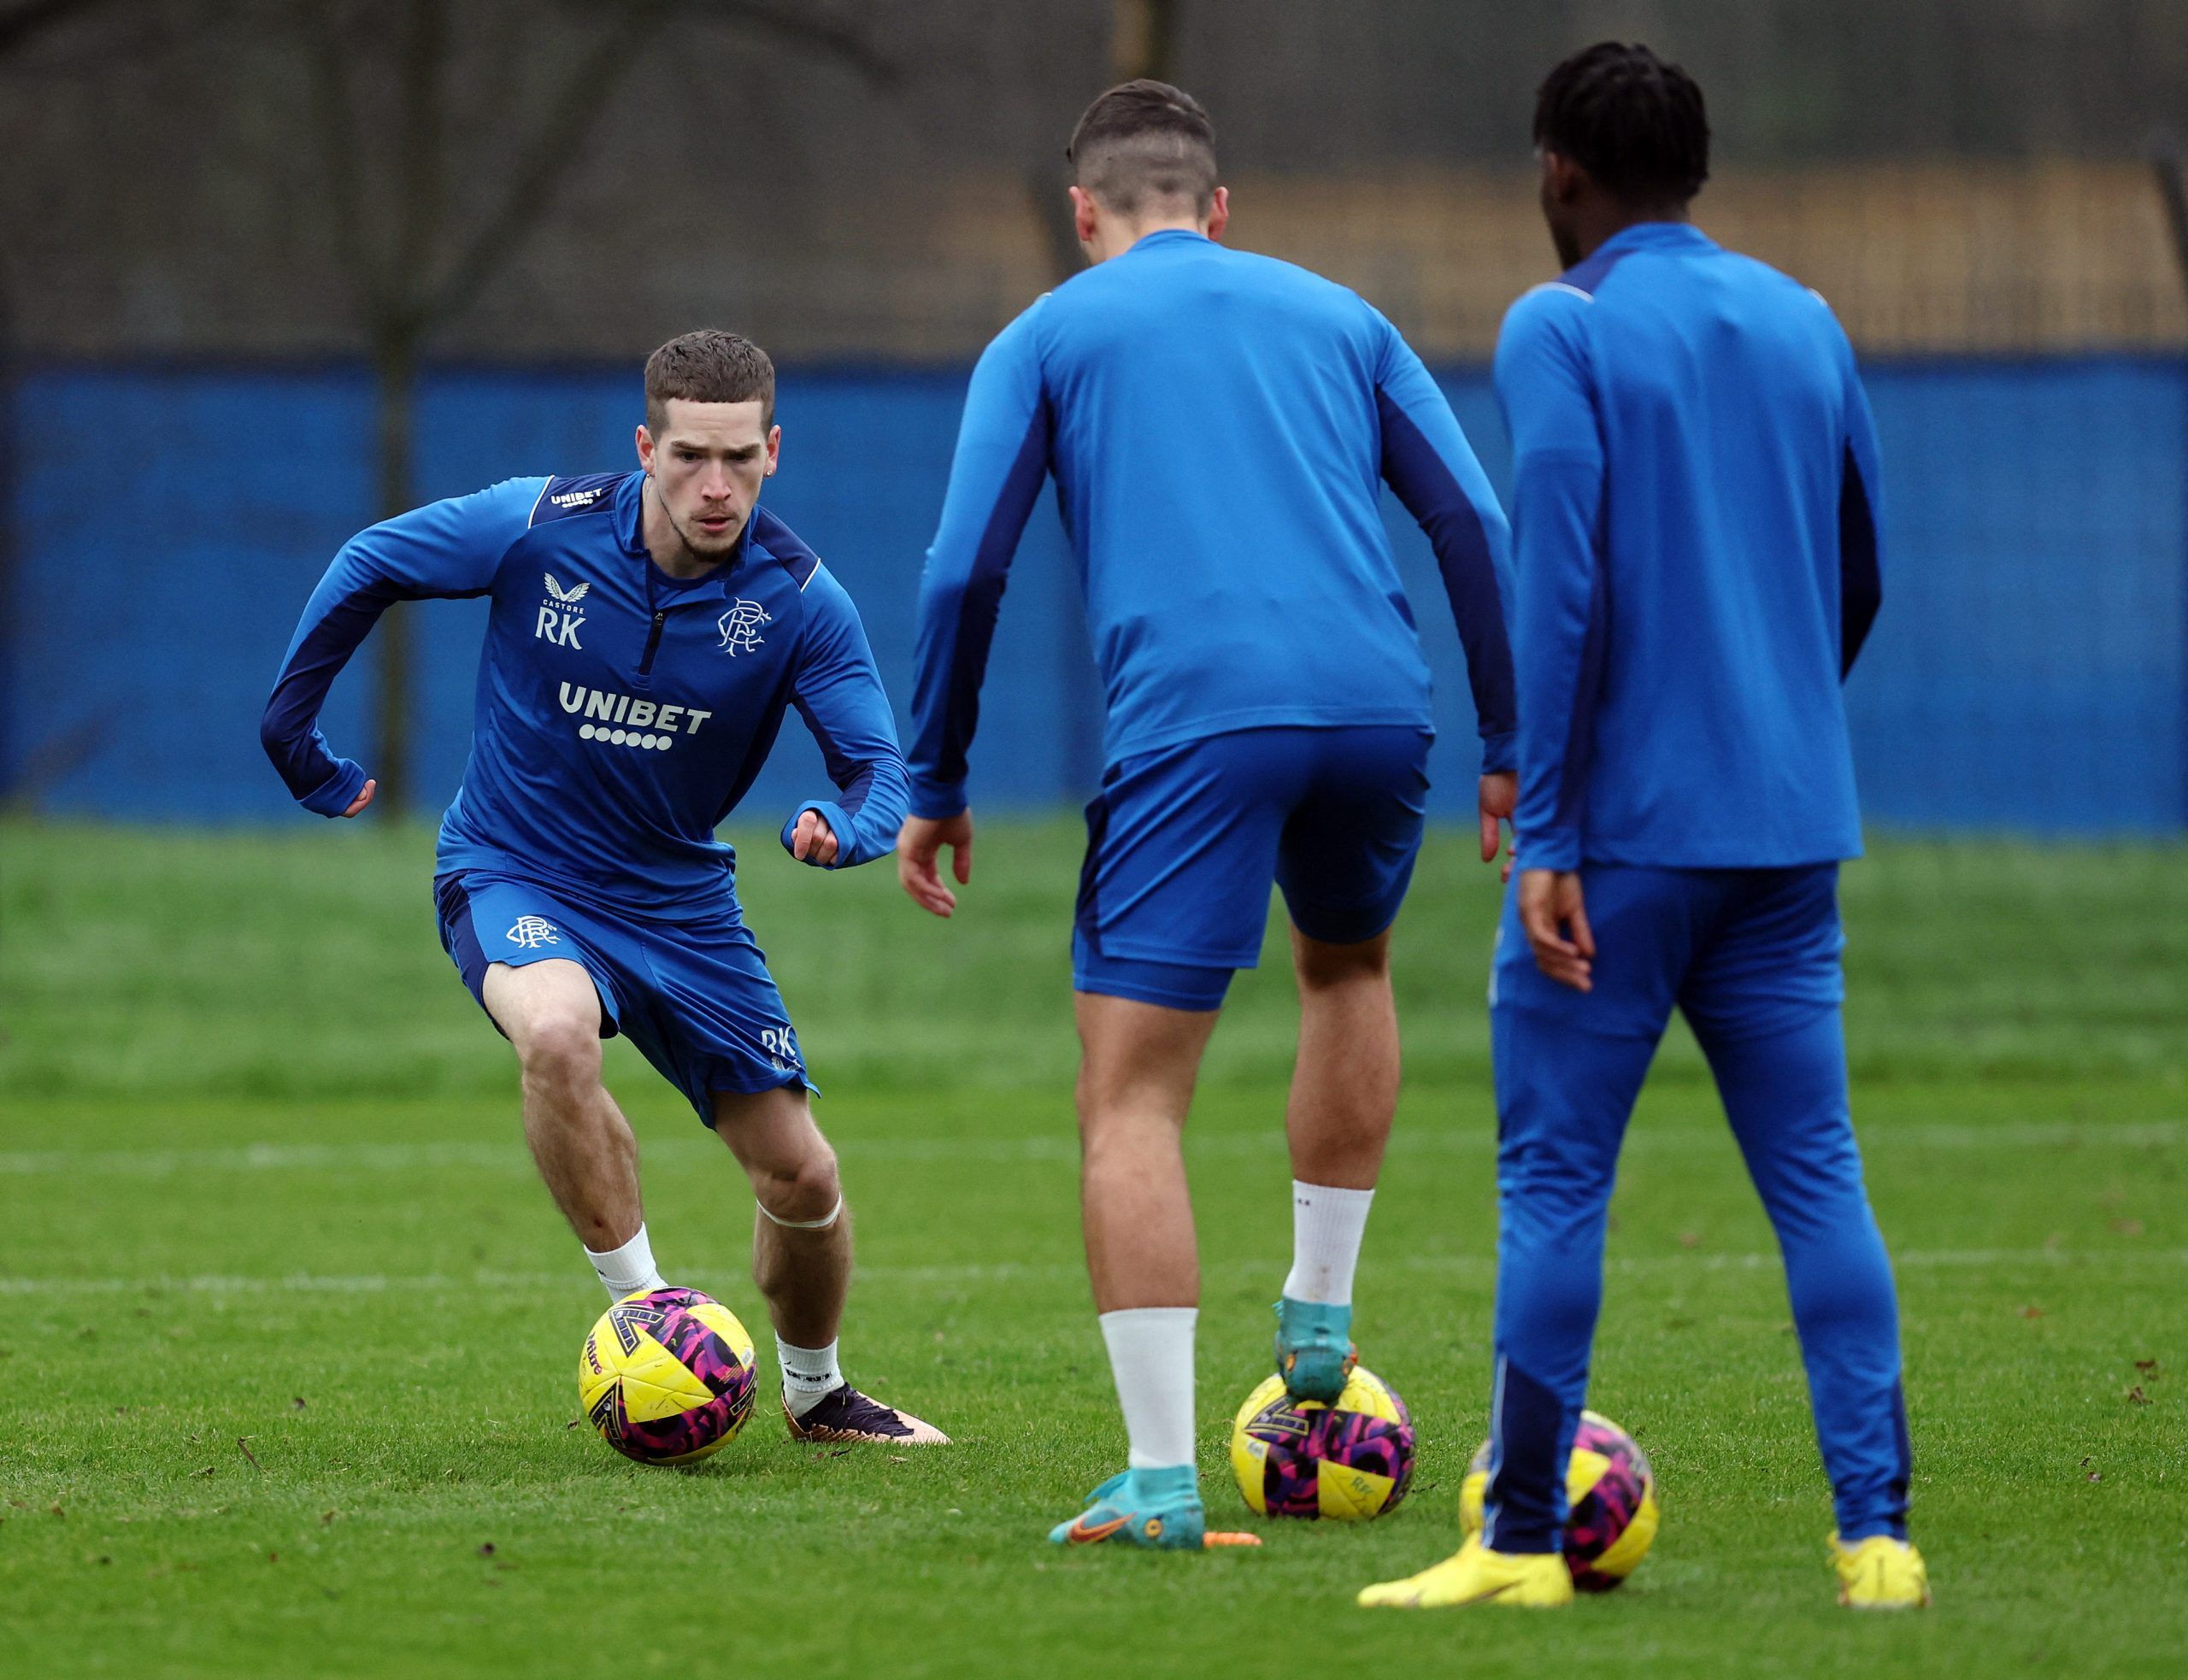 Soccer Football - Rangers Training with new manager Michael Beale - The Hummel Training Centre, Glasgow, Scotland, Britain - December 1, 2022 Rangers' Ryan Kent during training REUTERS/Russell Cheyne